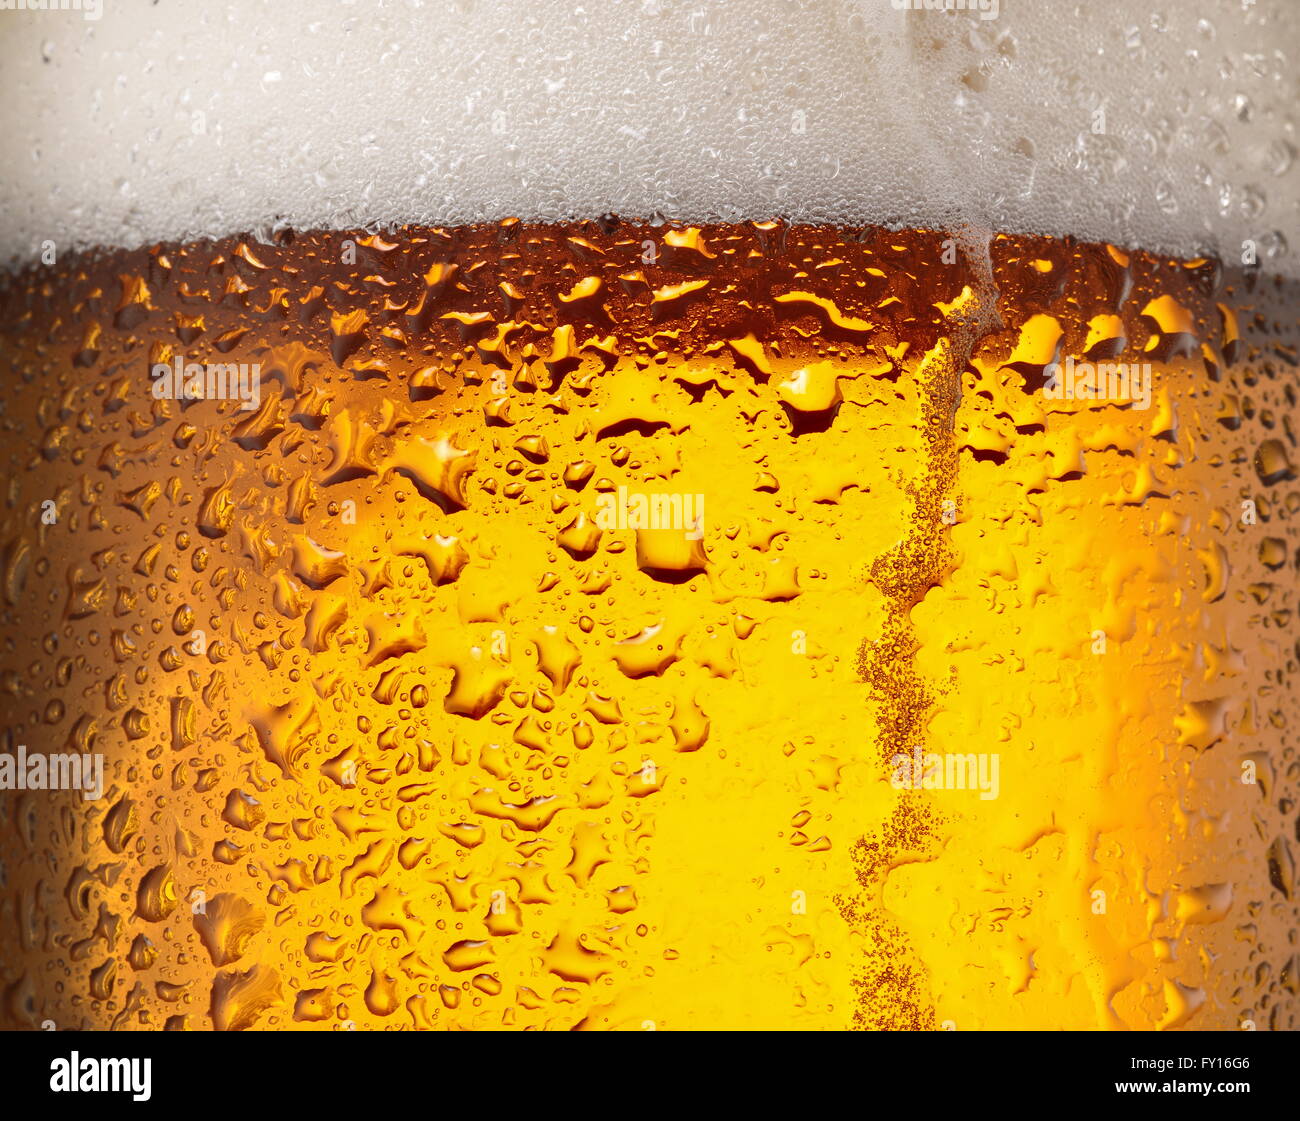 Water drops on glass of beer. Close up. Stock Photo